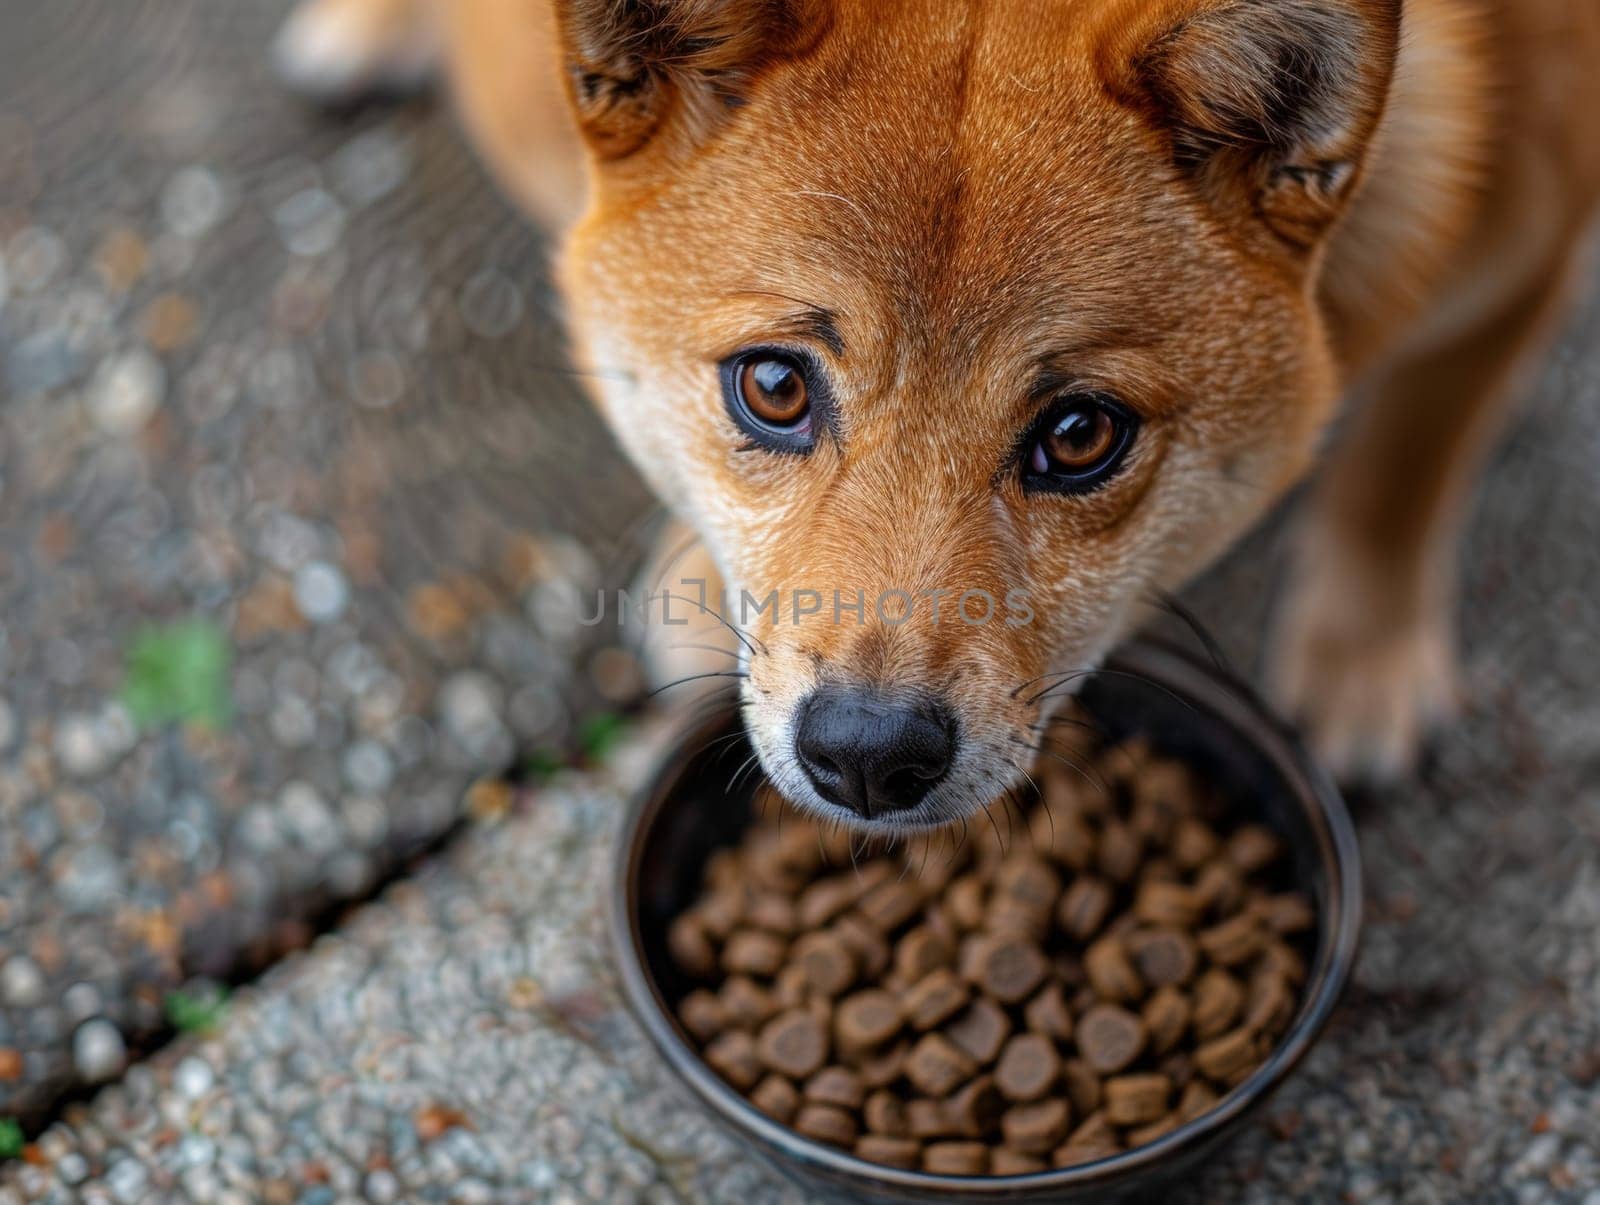 Hungry Shiba Inu dog protecting a bowl of dry food outdoors.